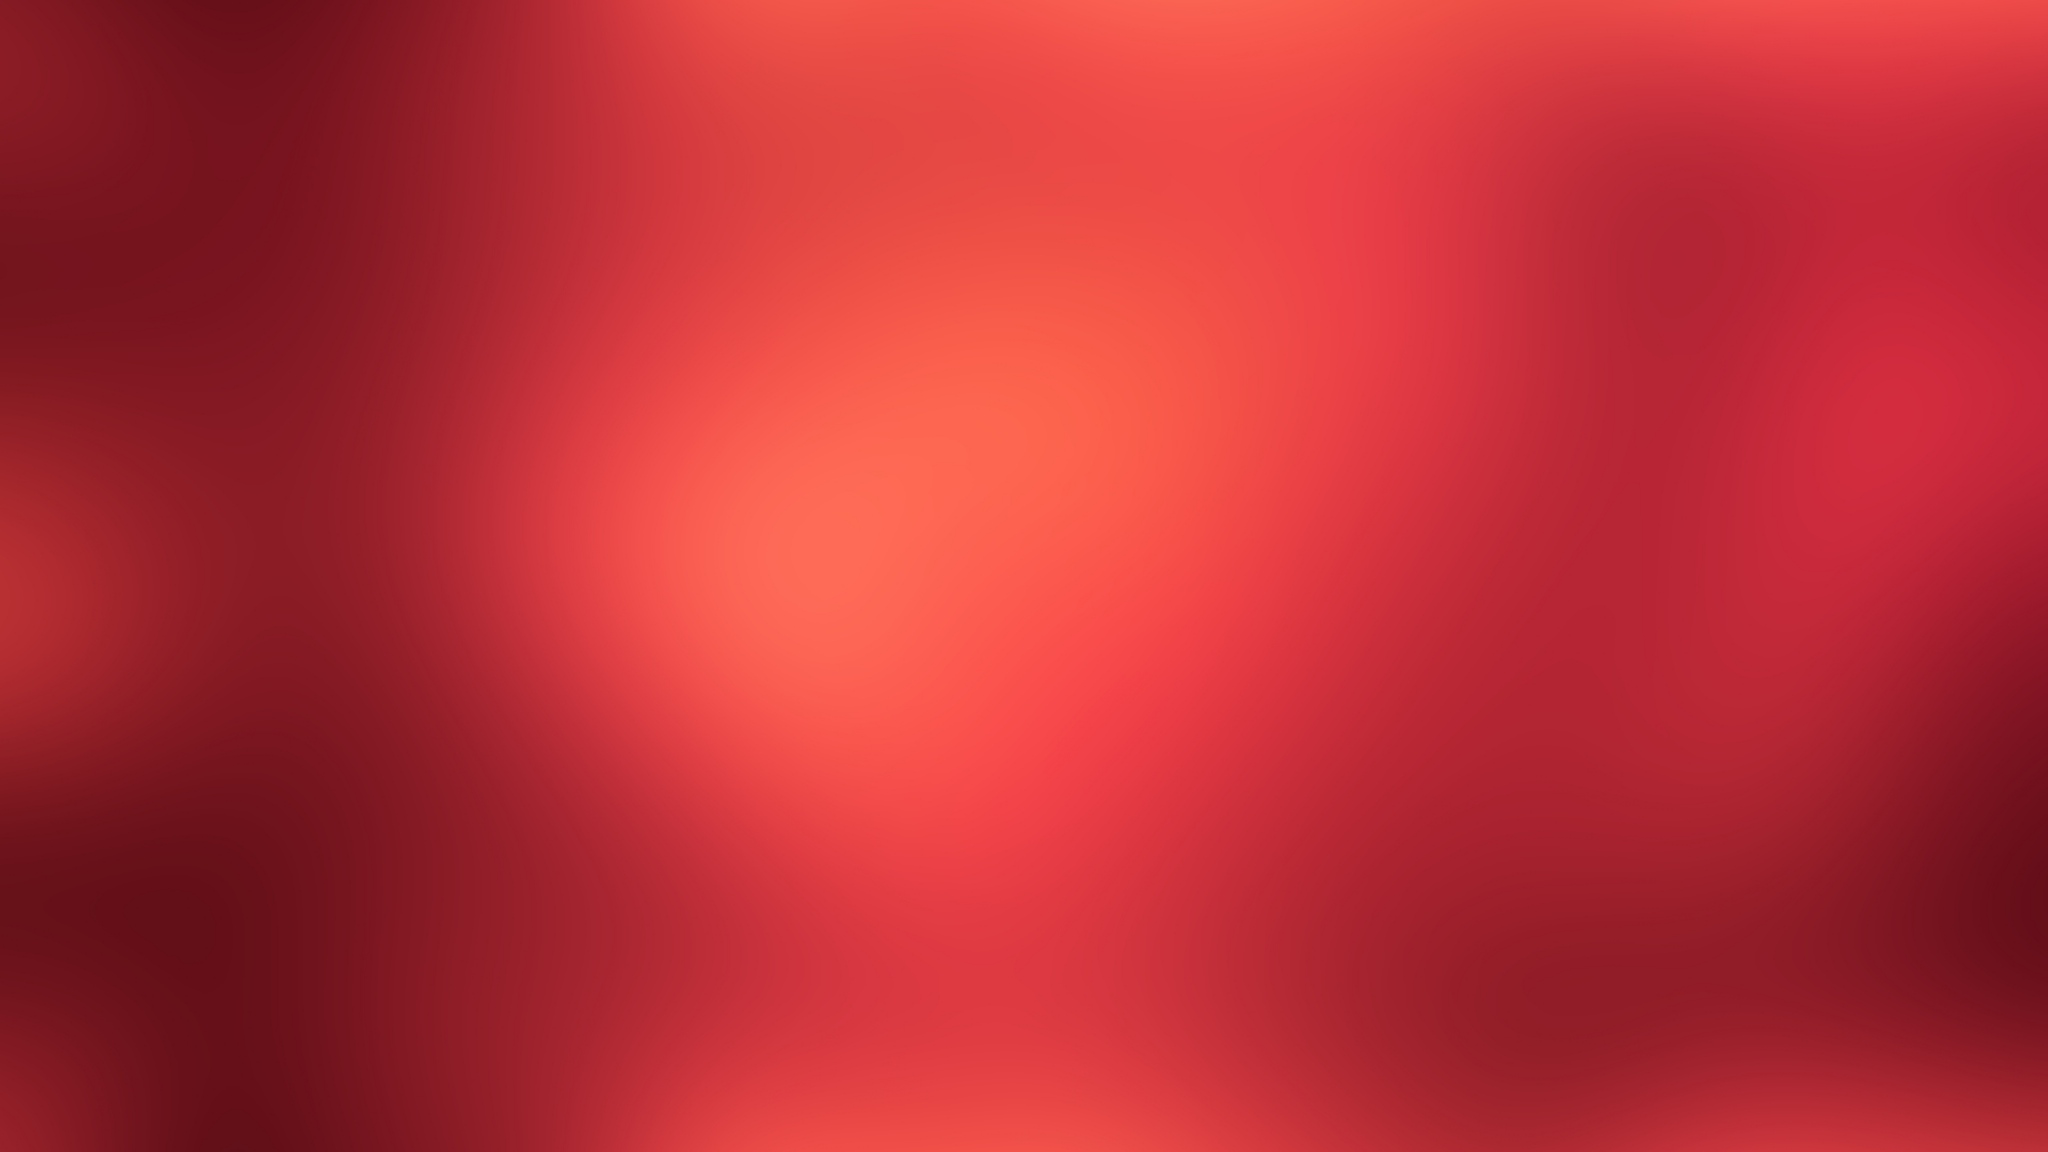 Wallpaper Solid Red Bright Shiny HD